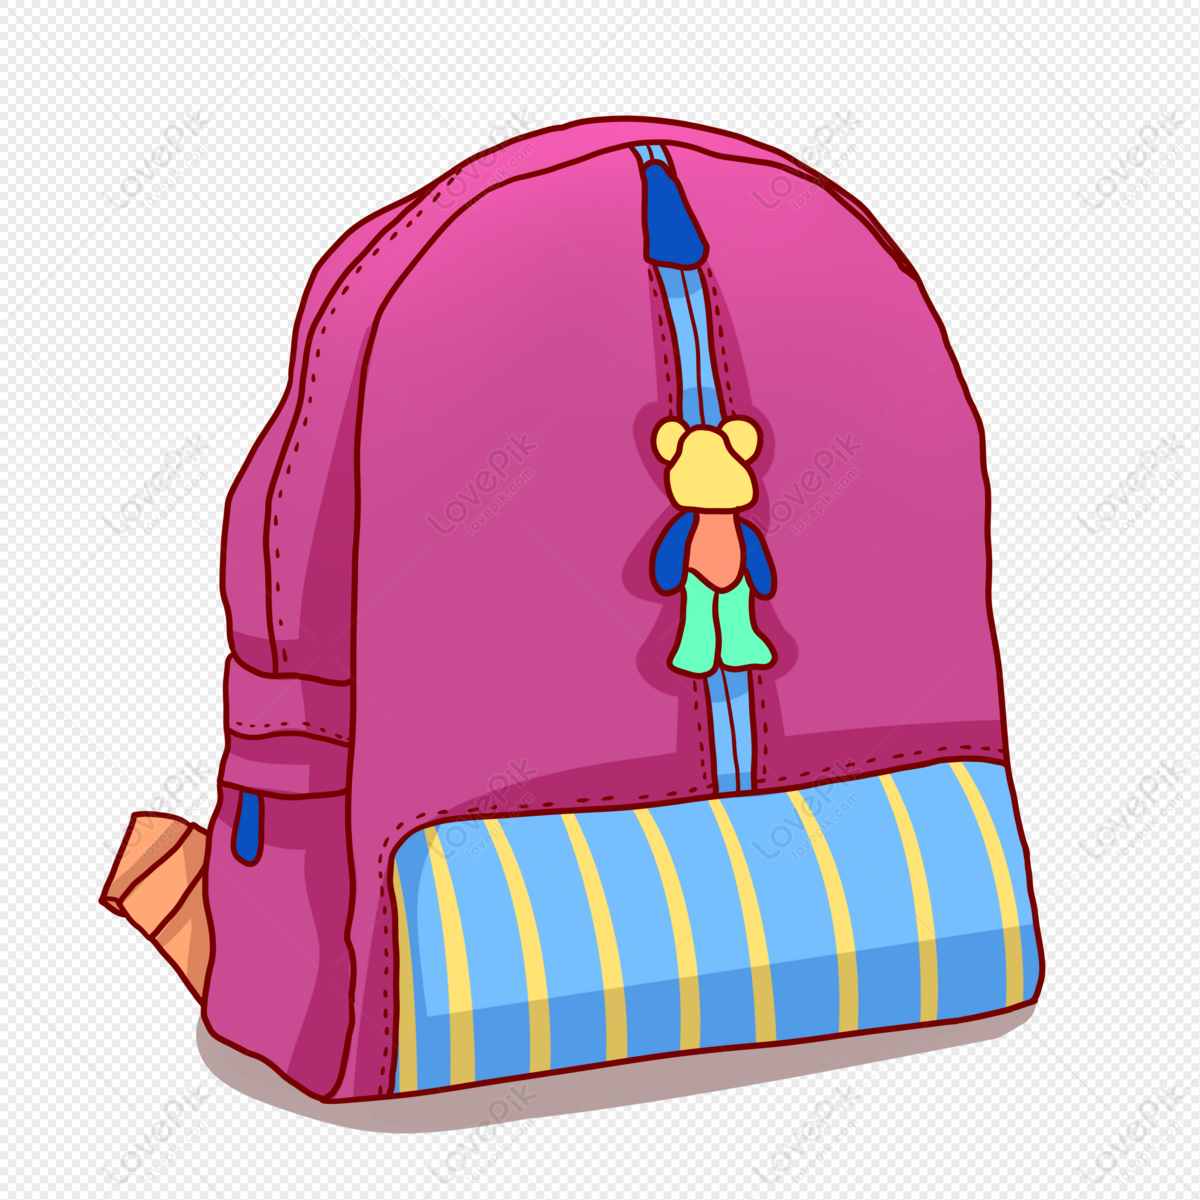 School Bag Clipart PNG, Vector, PSD, and Clipart With Transparent